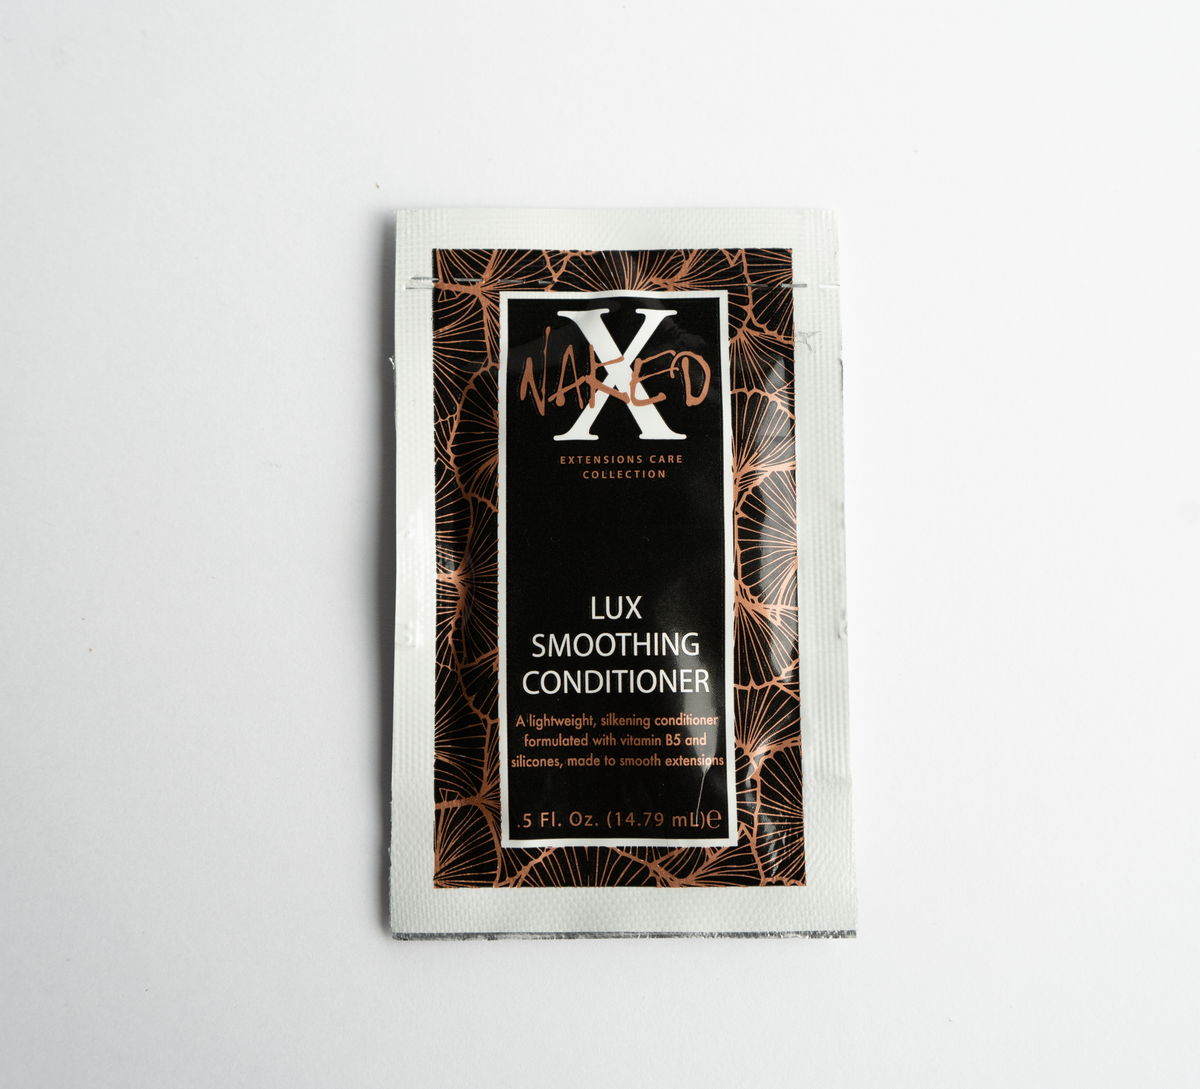 Lux Smoothing Conditioner - Naked X by Essations